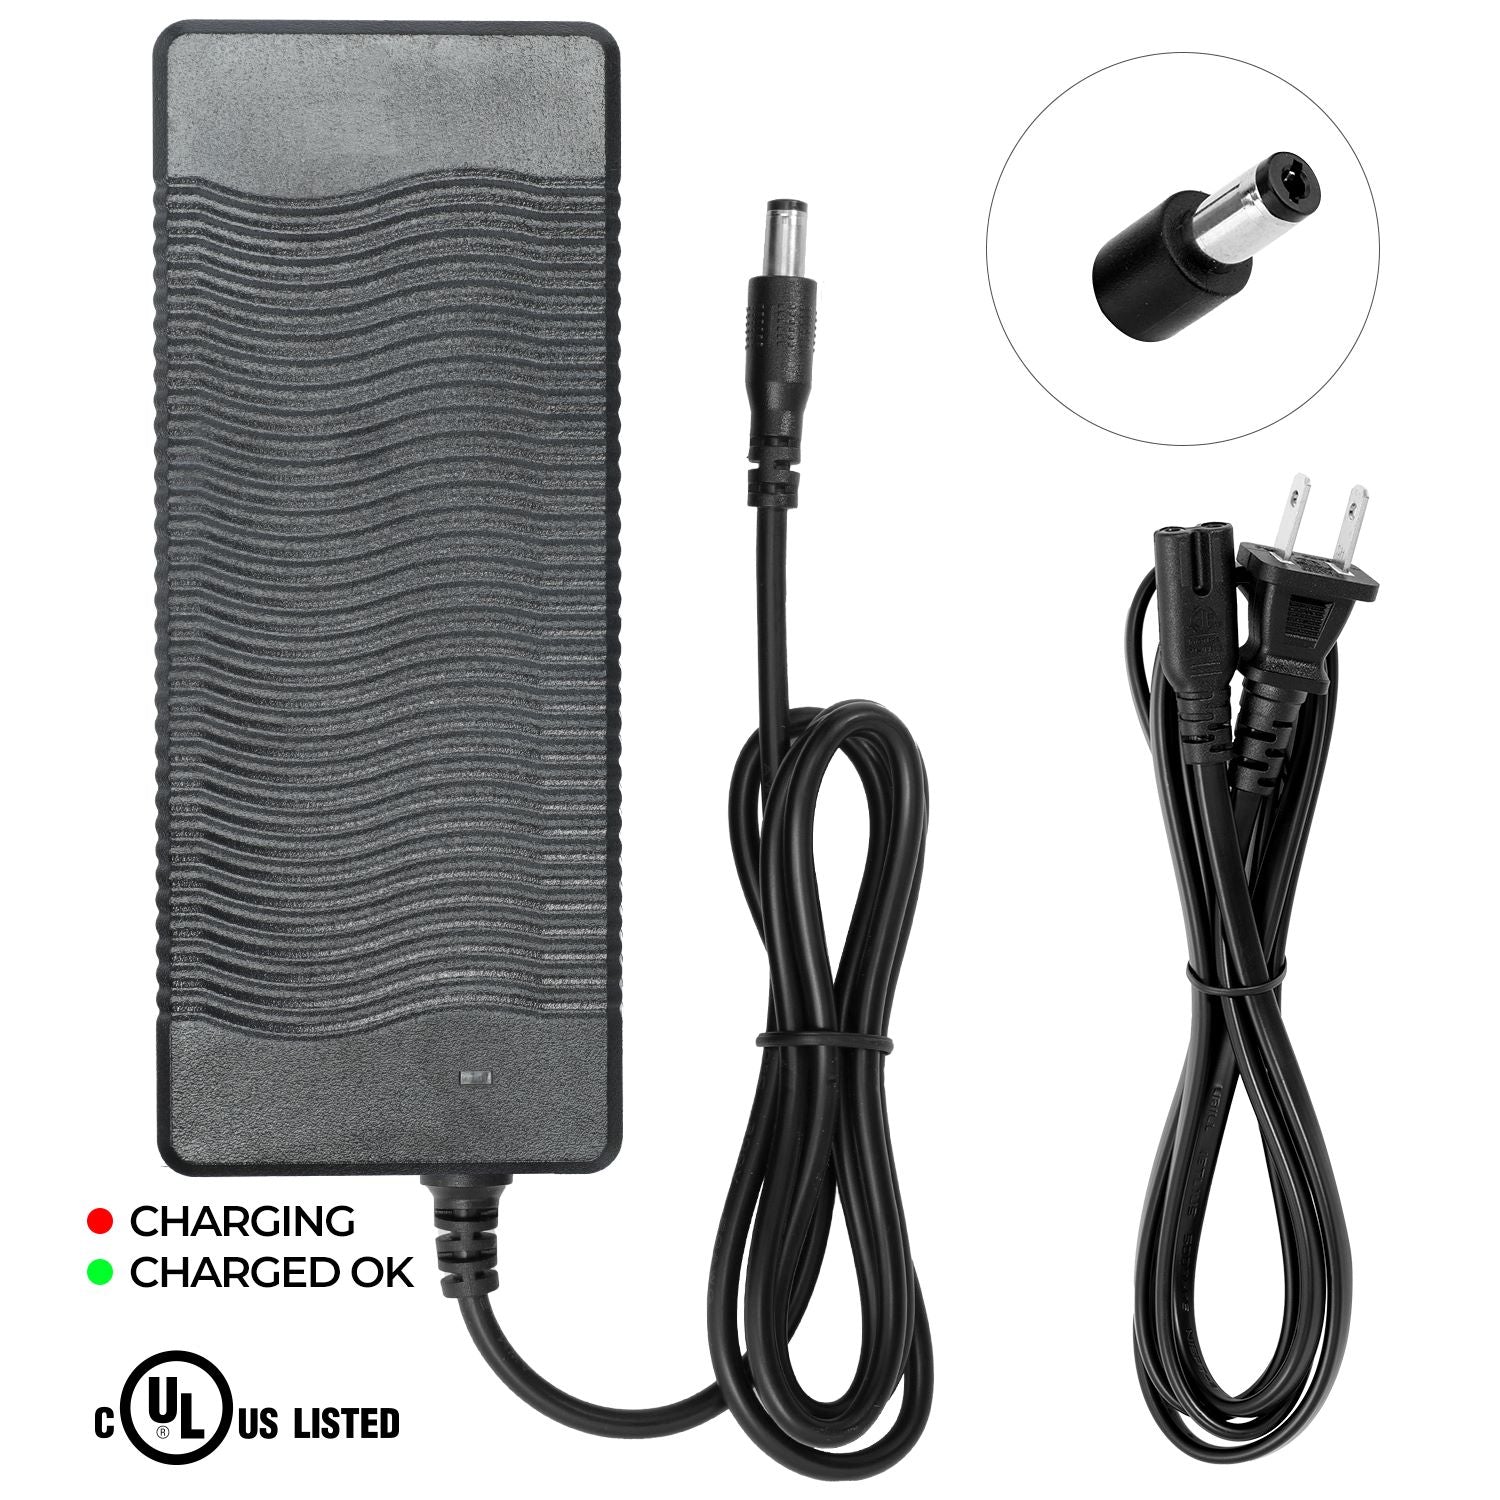 Charger for Blix Dubbel Electric Bike